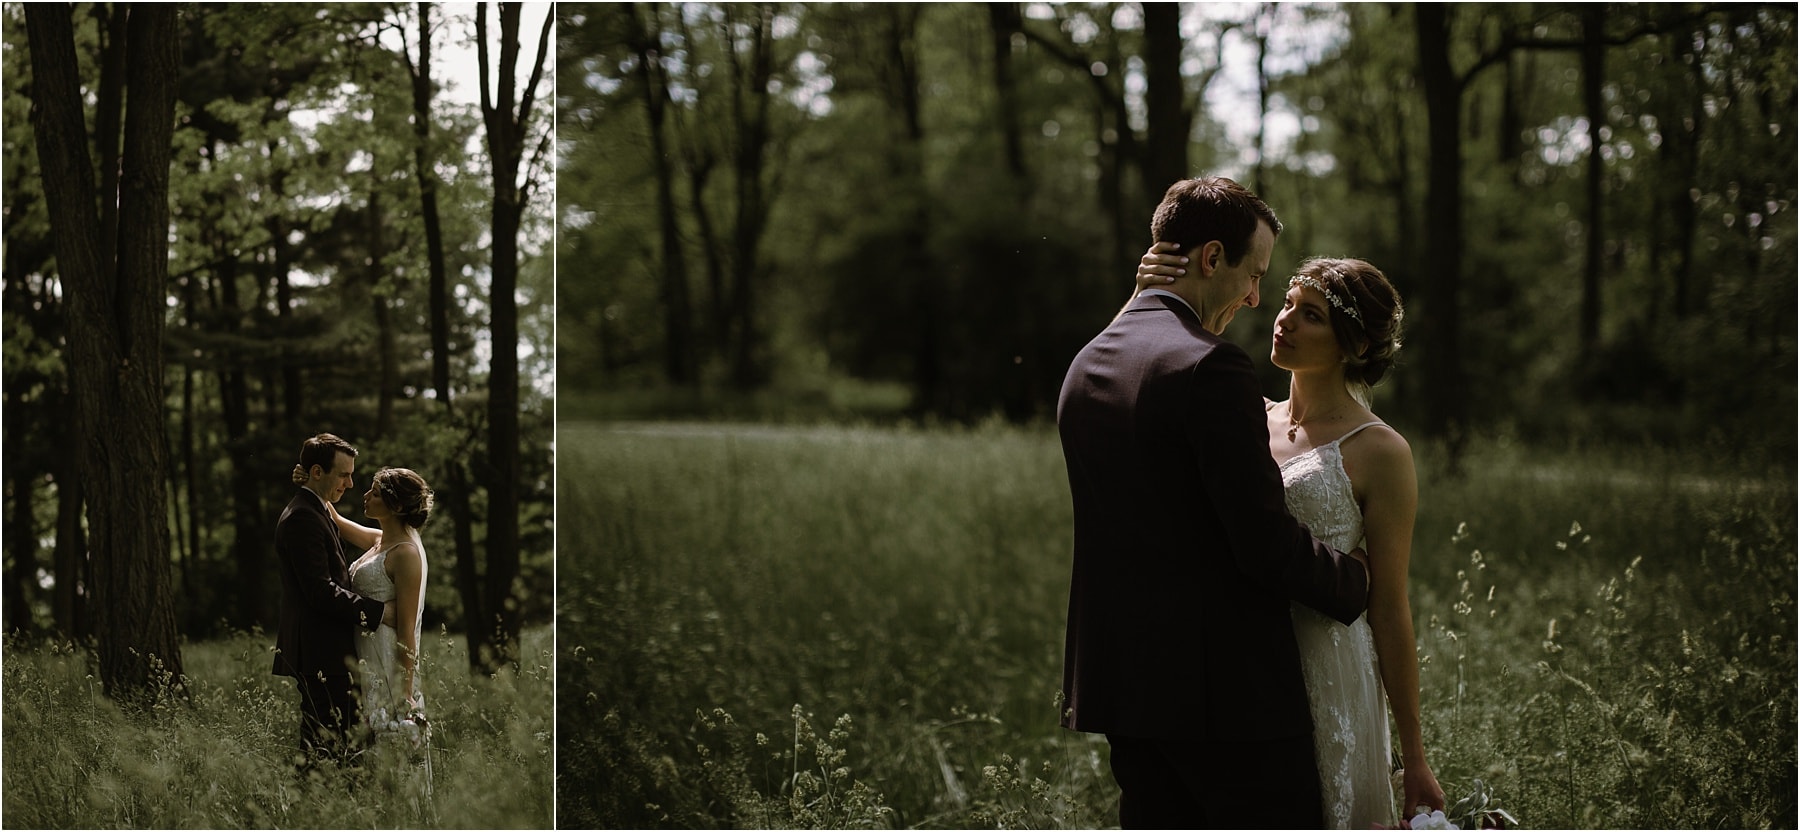 ethereal forest wedding photography michigan